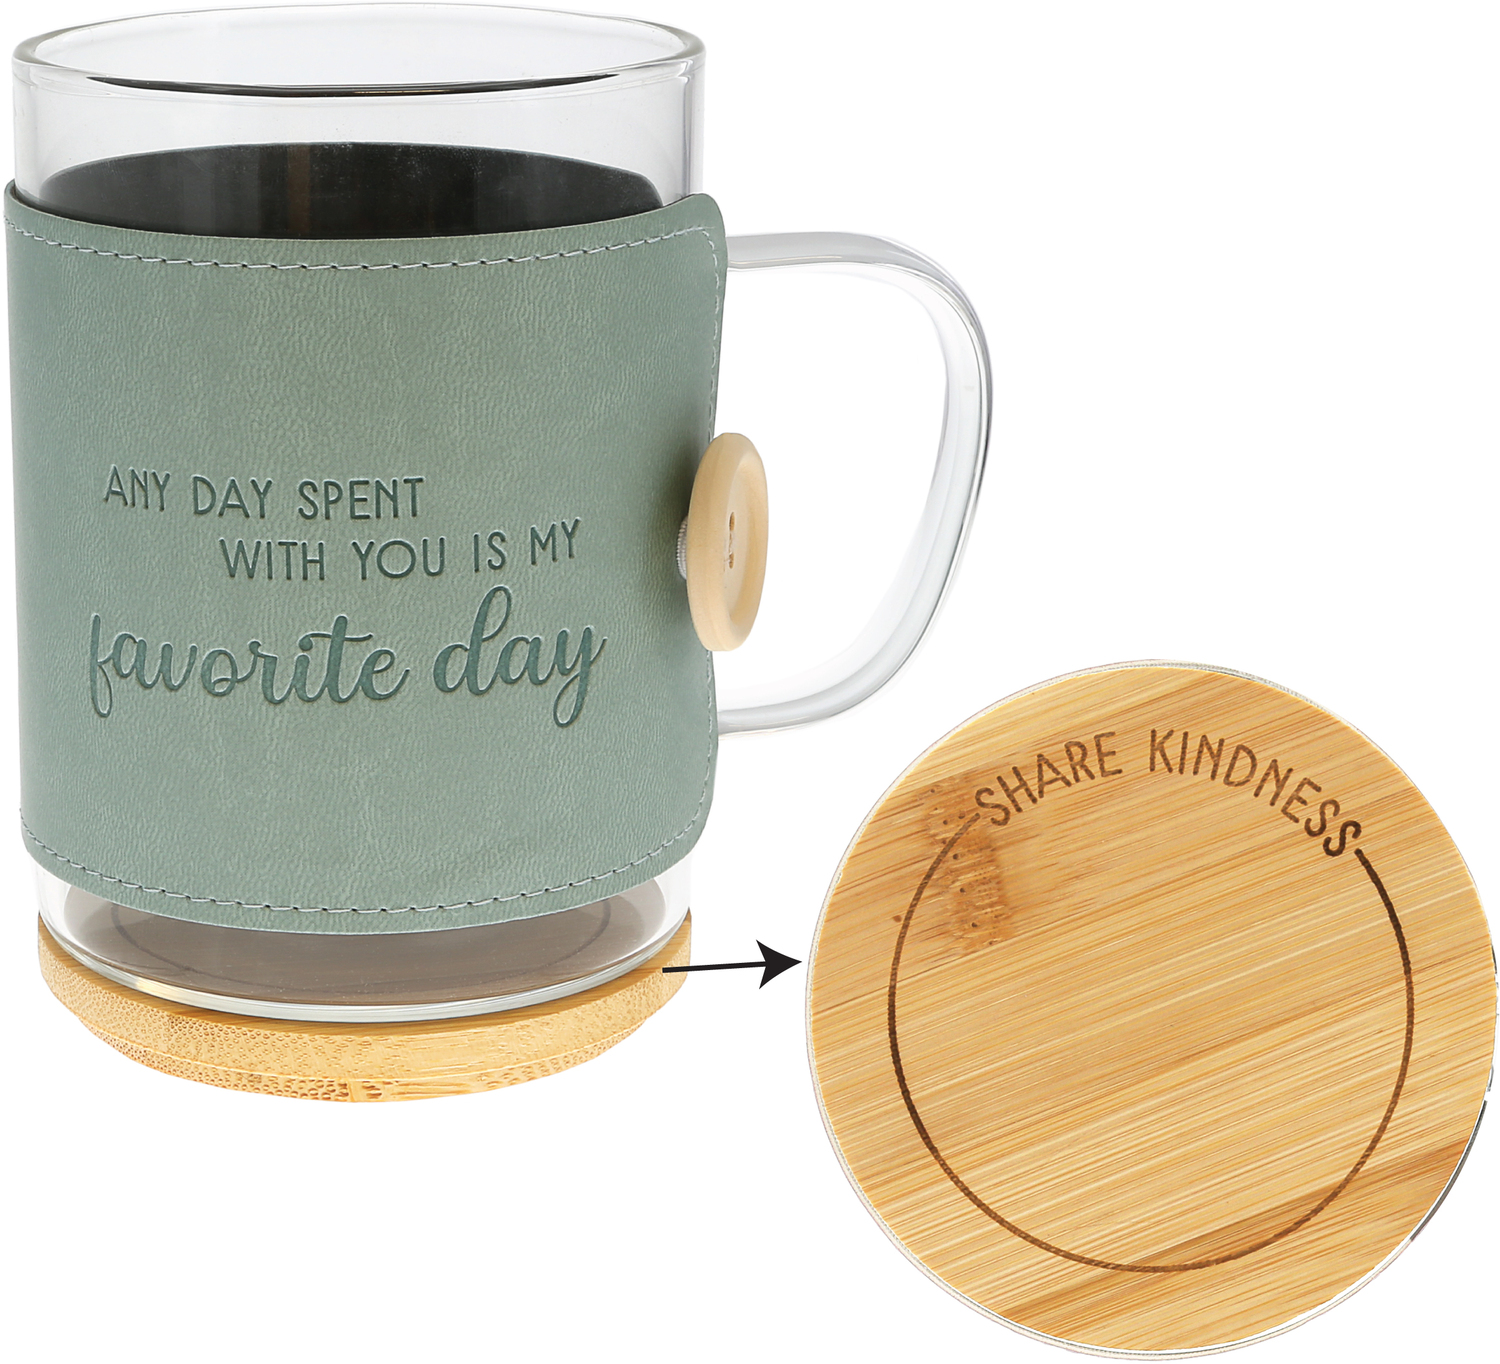 Favorite Day by Wrapped in Kindness - Favorite Day - 16 oz Wrapped Glass Mug with Coaster Lid